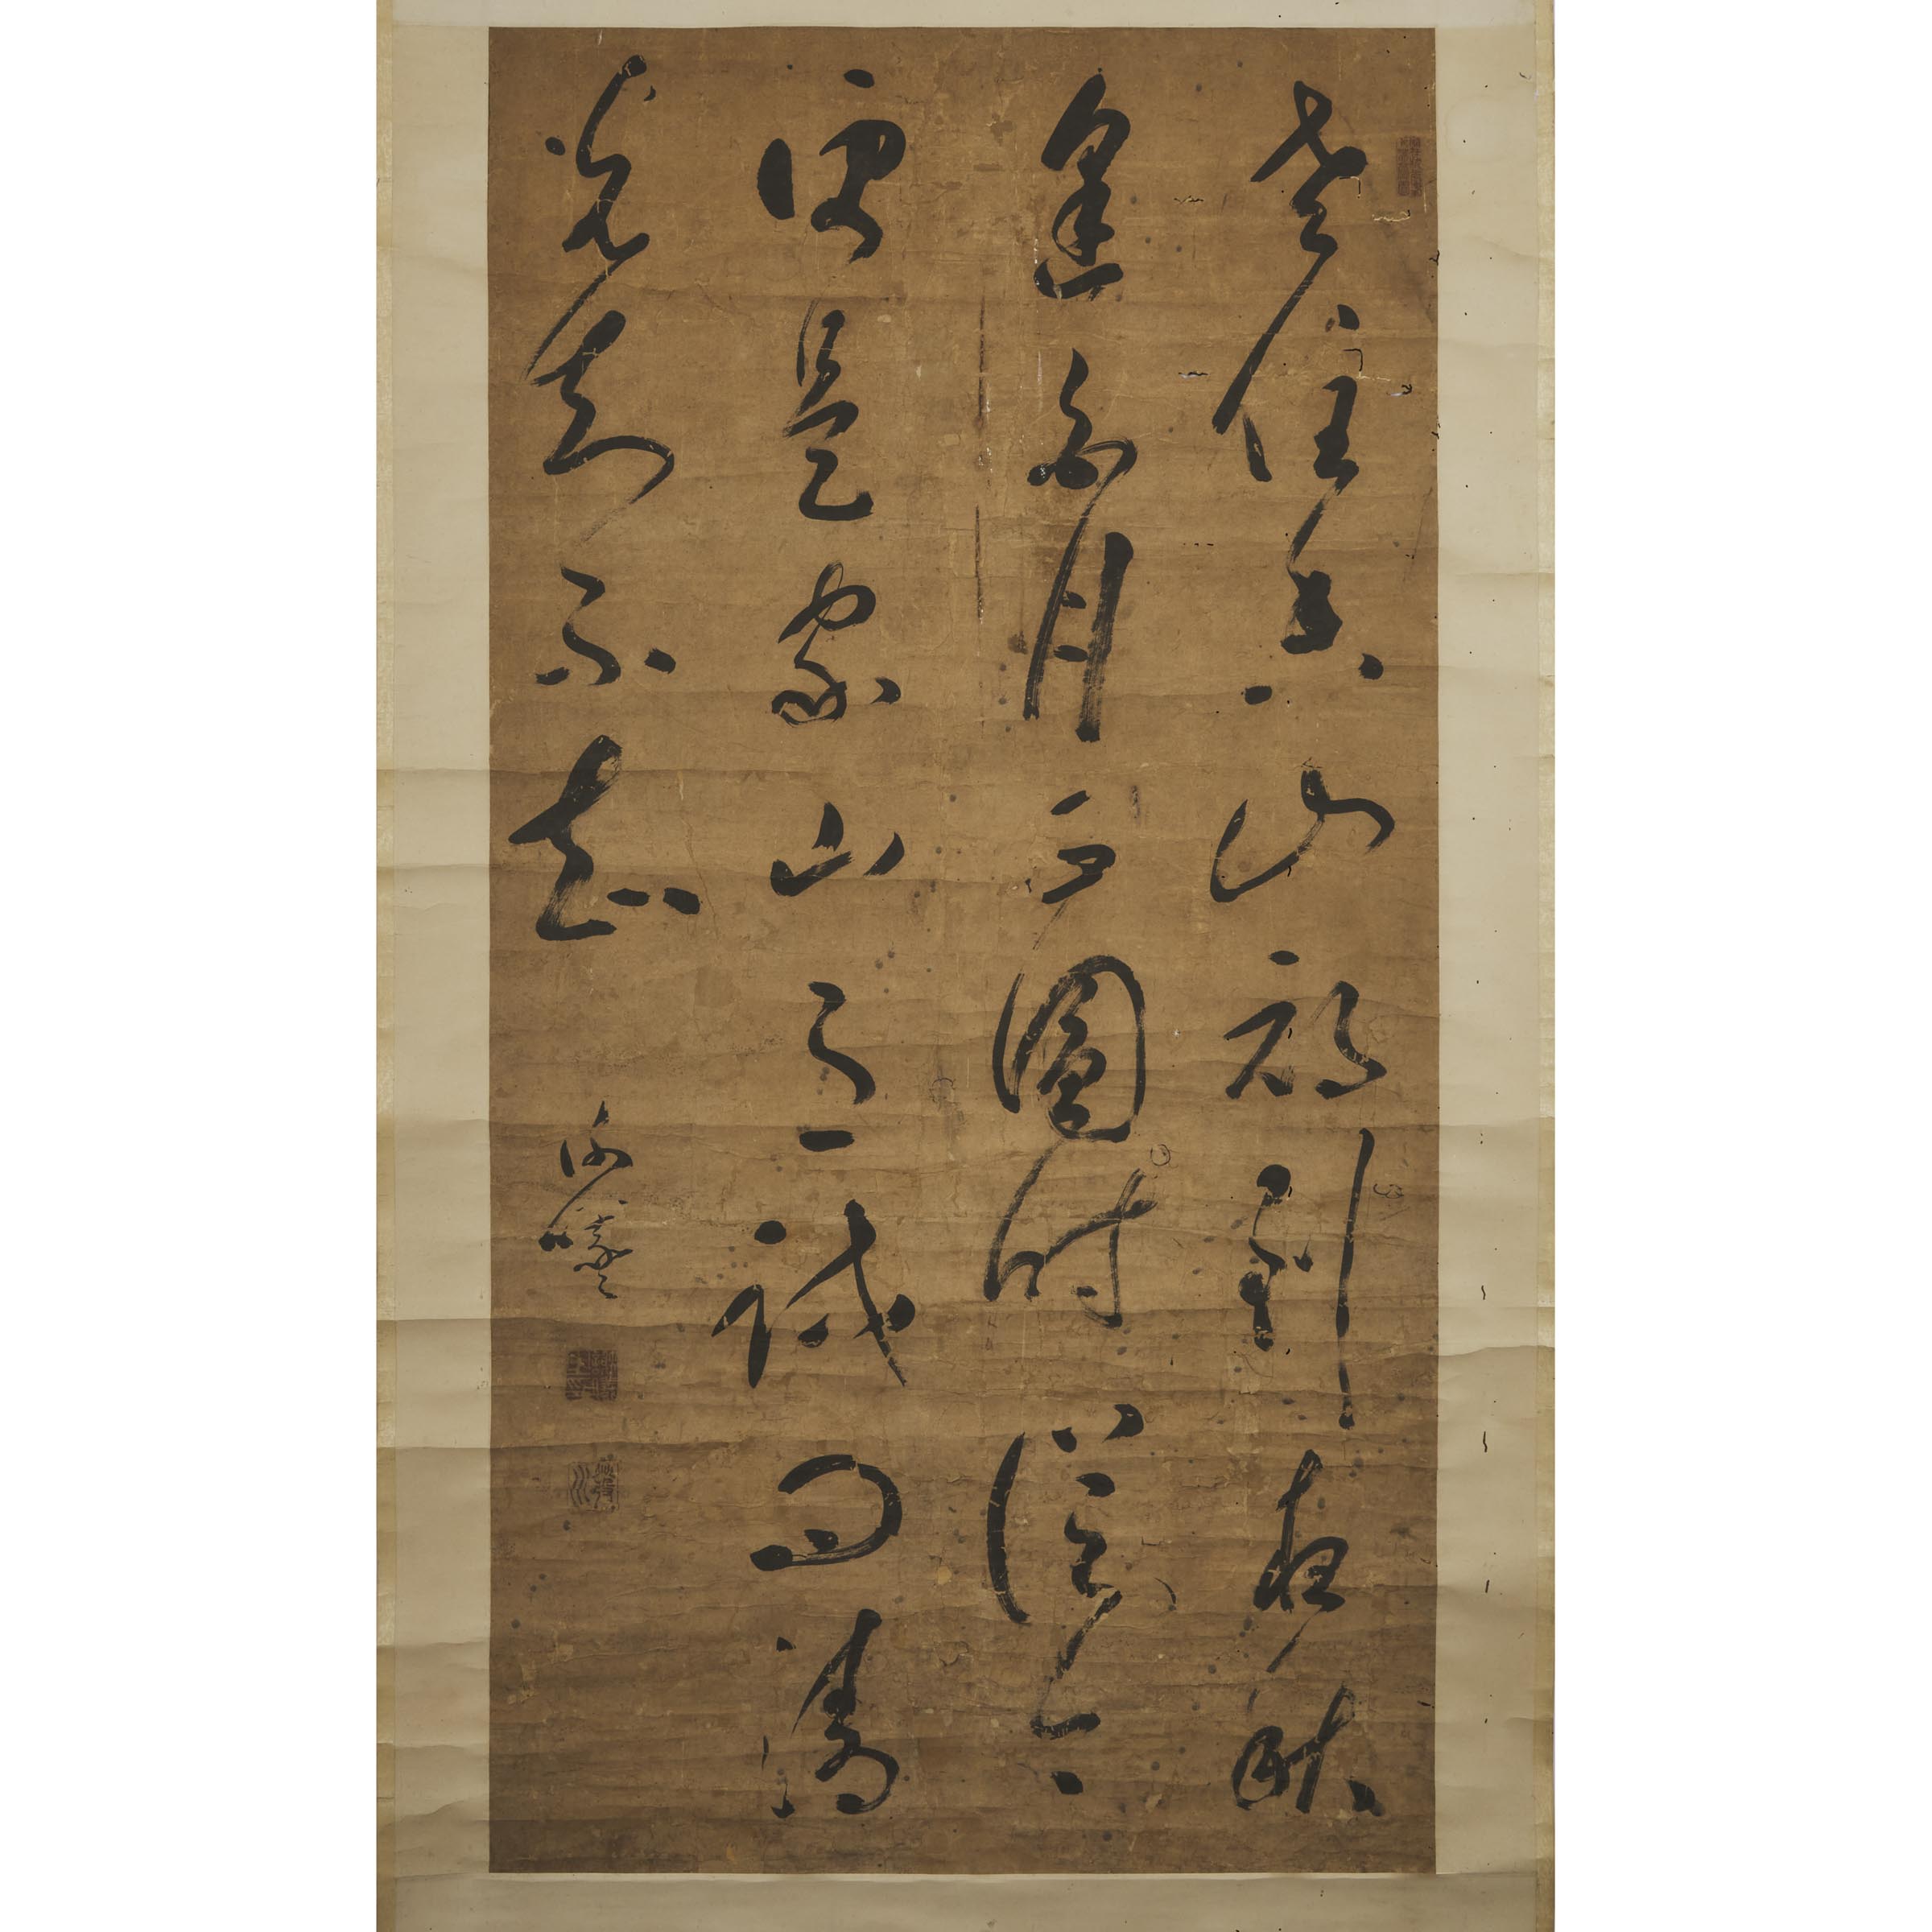 Xie Xi (18th Century), Calligraphy of a Poem by Bai Juyi